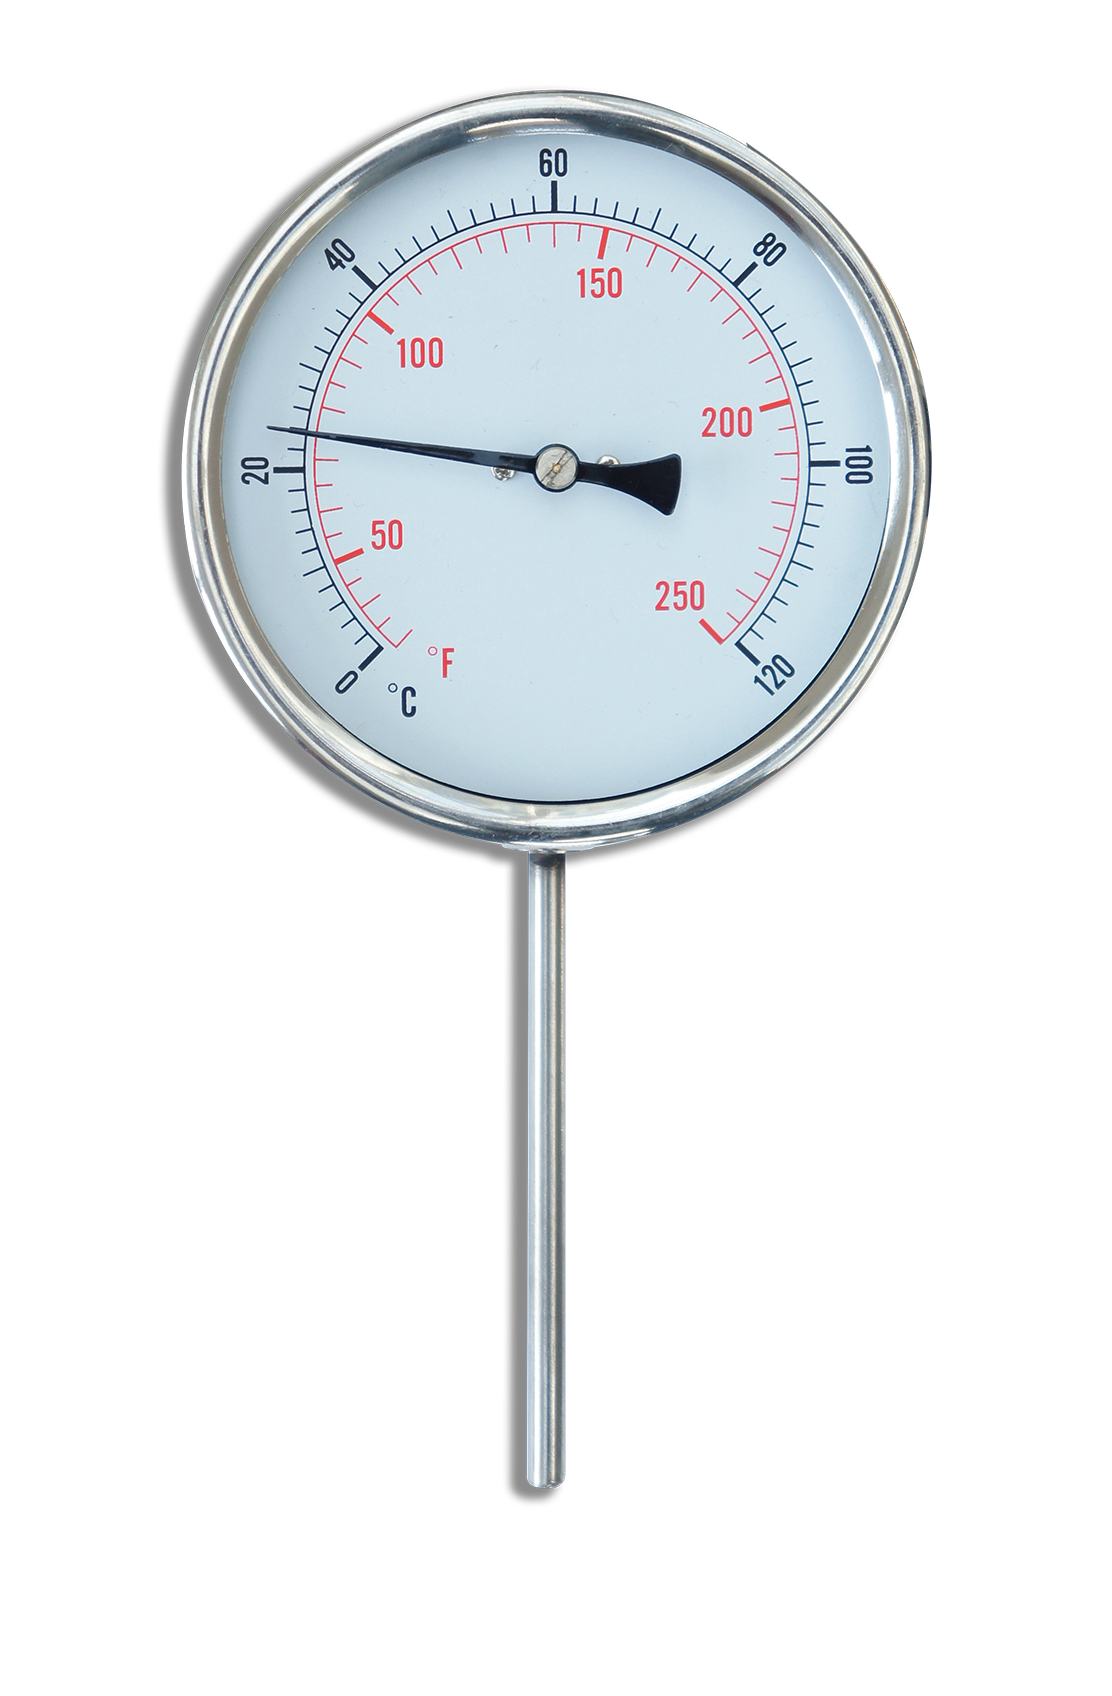 Low Cost Stainless Steel Bimetal Thermometer